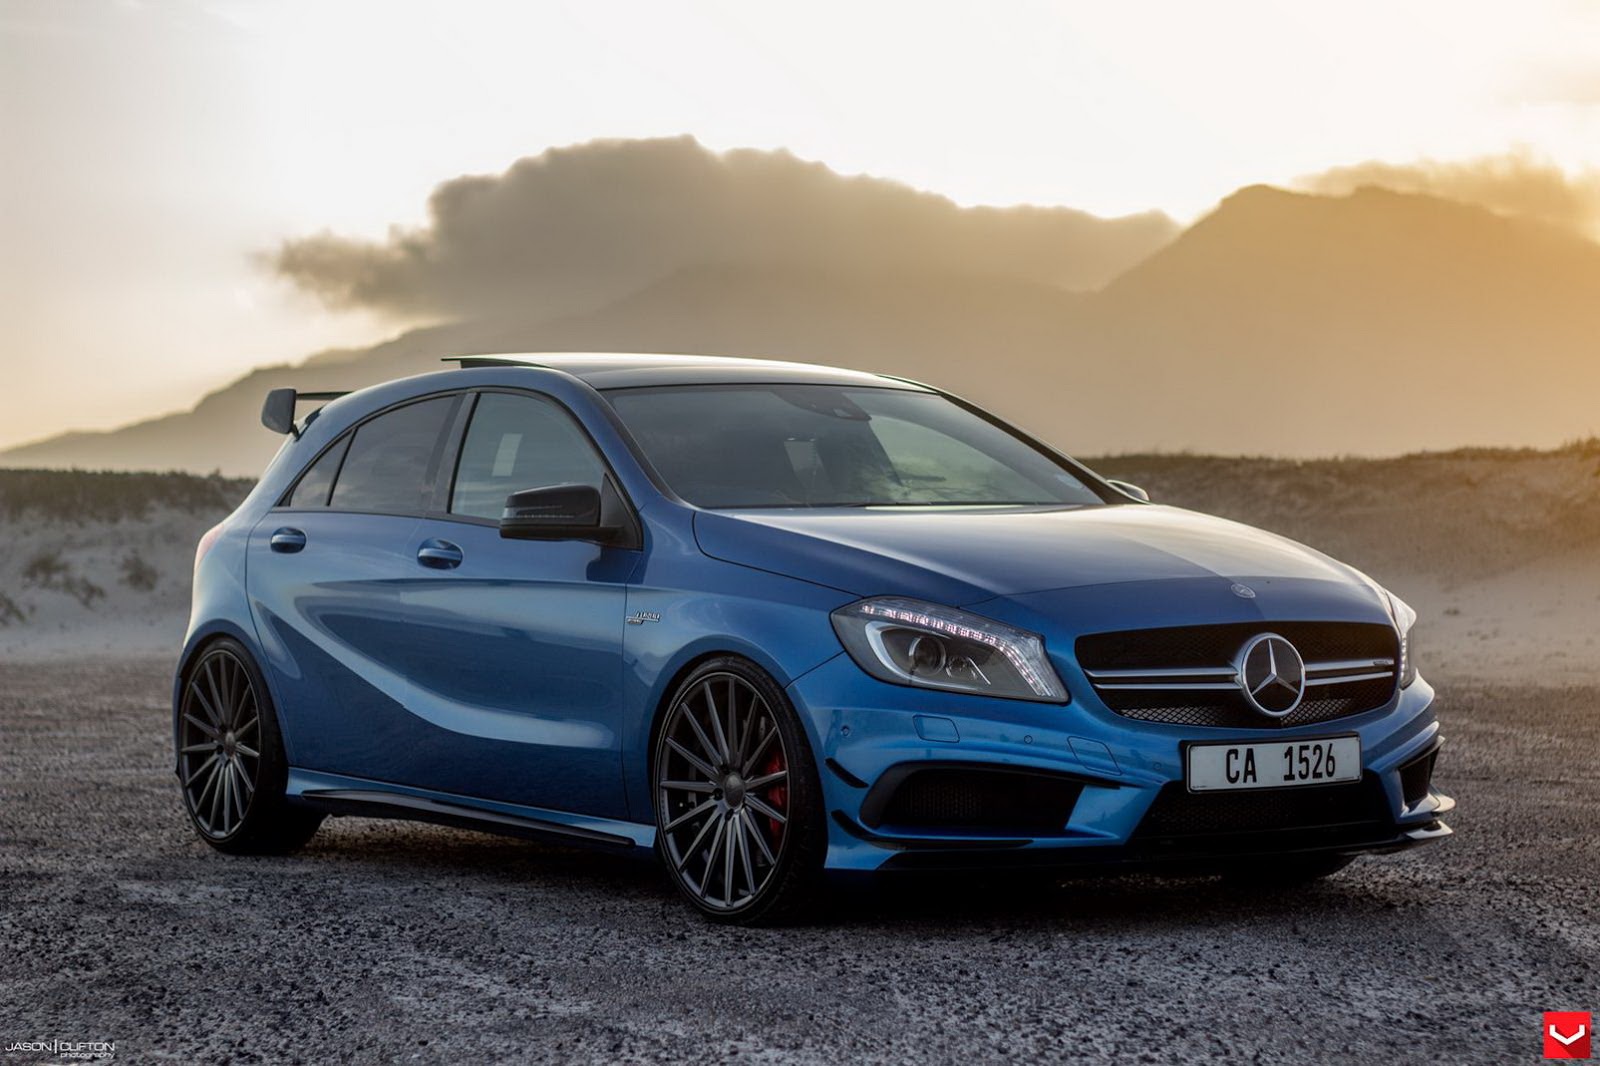 Mercedes Benz Amg A45 Wallpapers Vehicles Hq Mercedes Benz Amg Images, Photos, Reviews